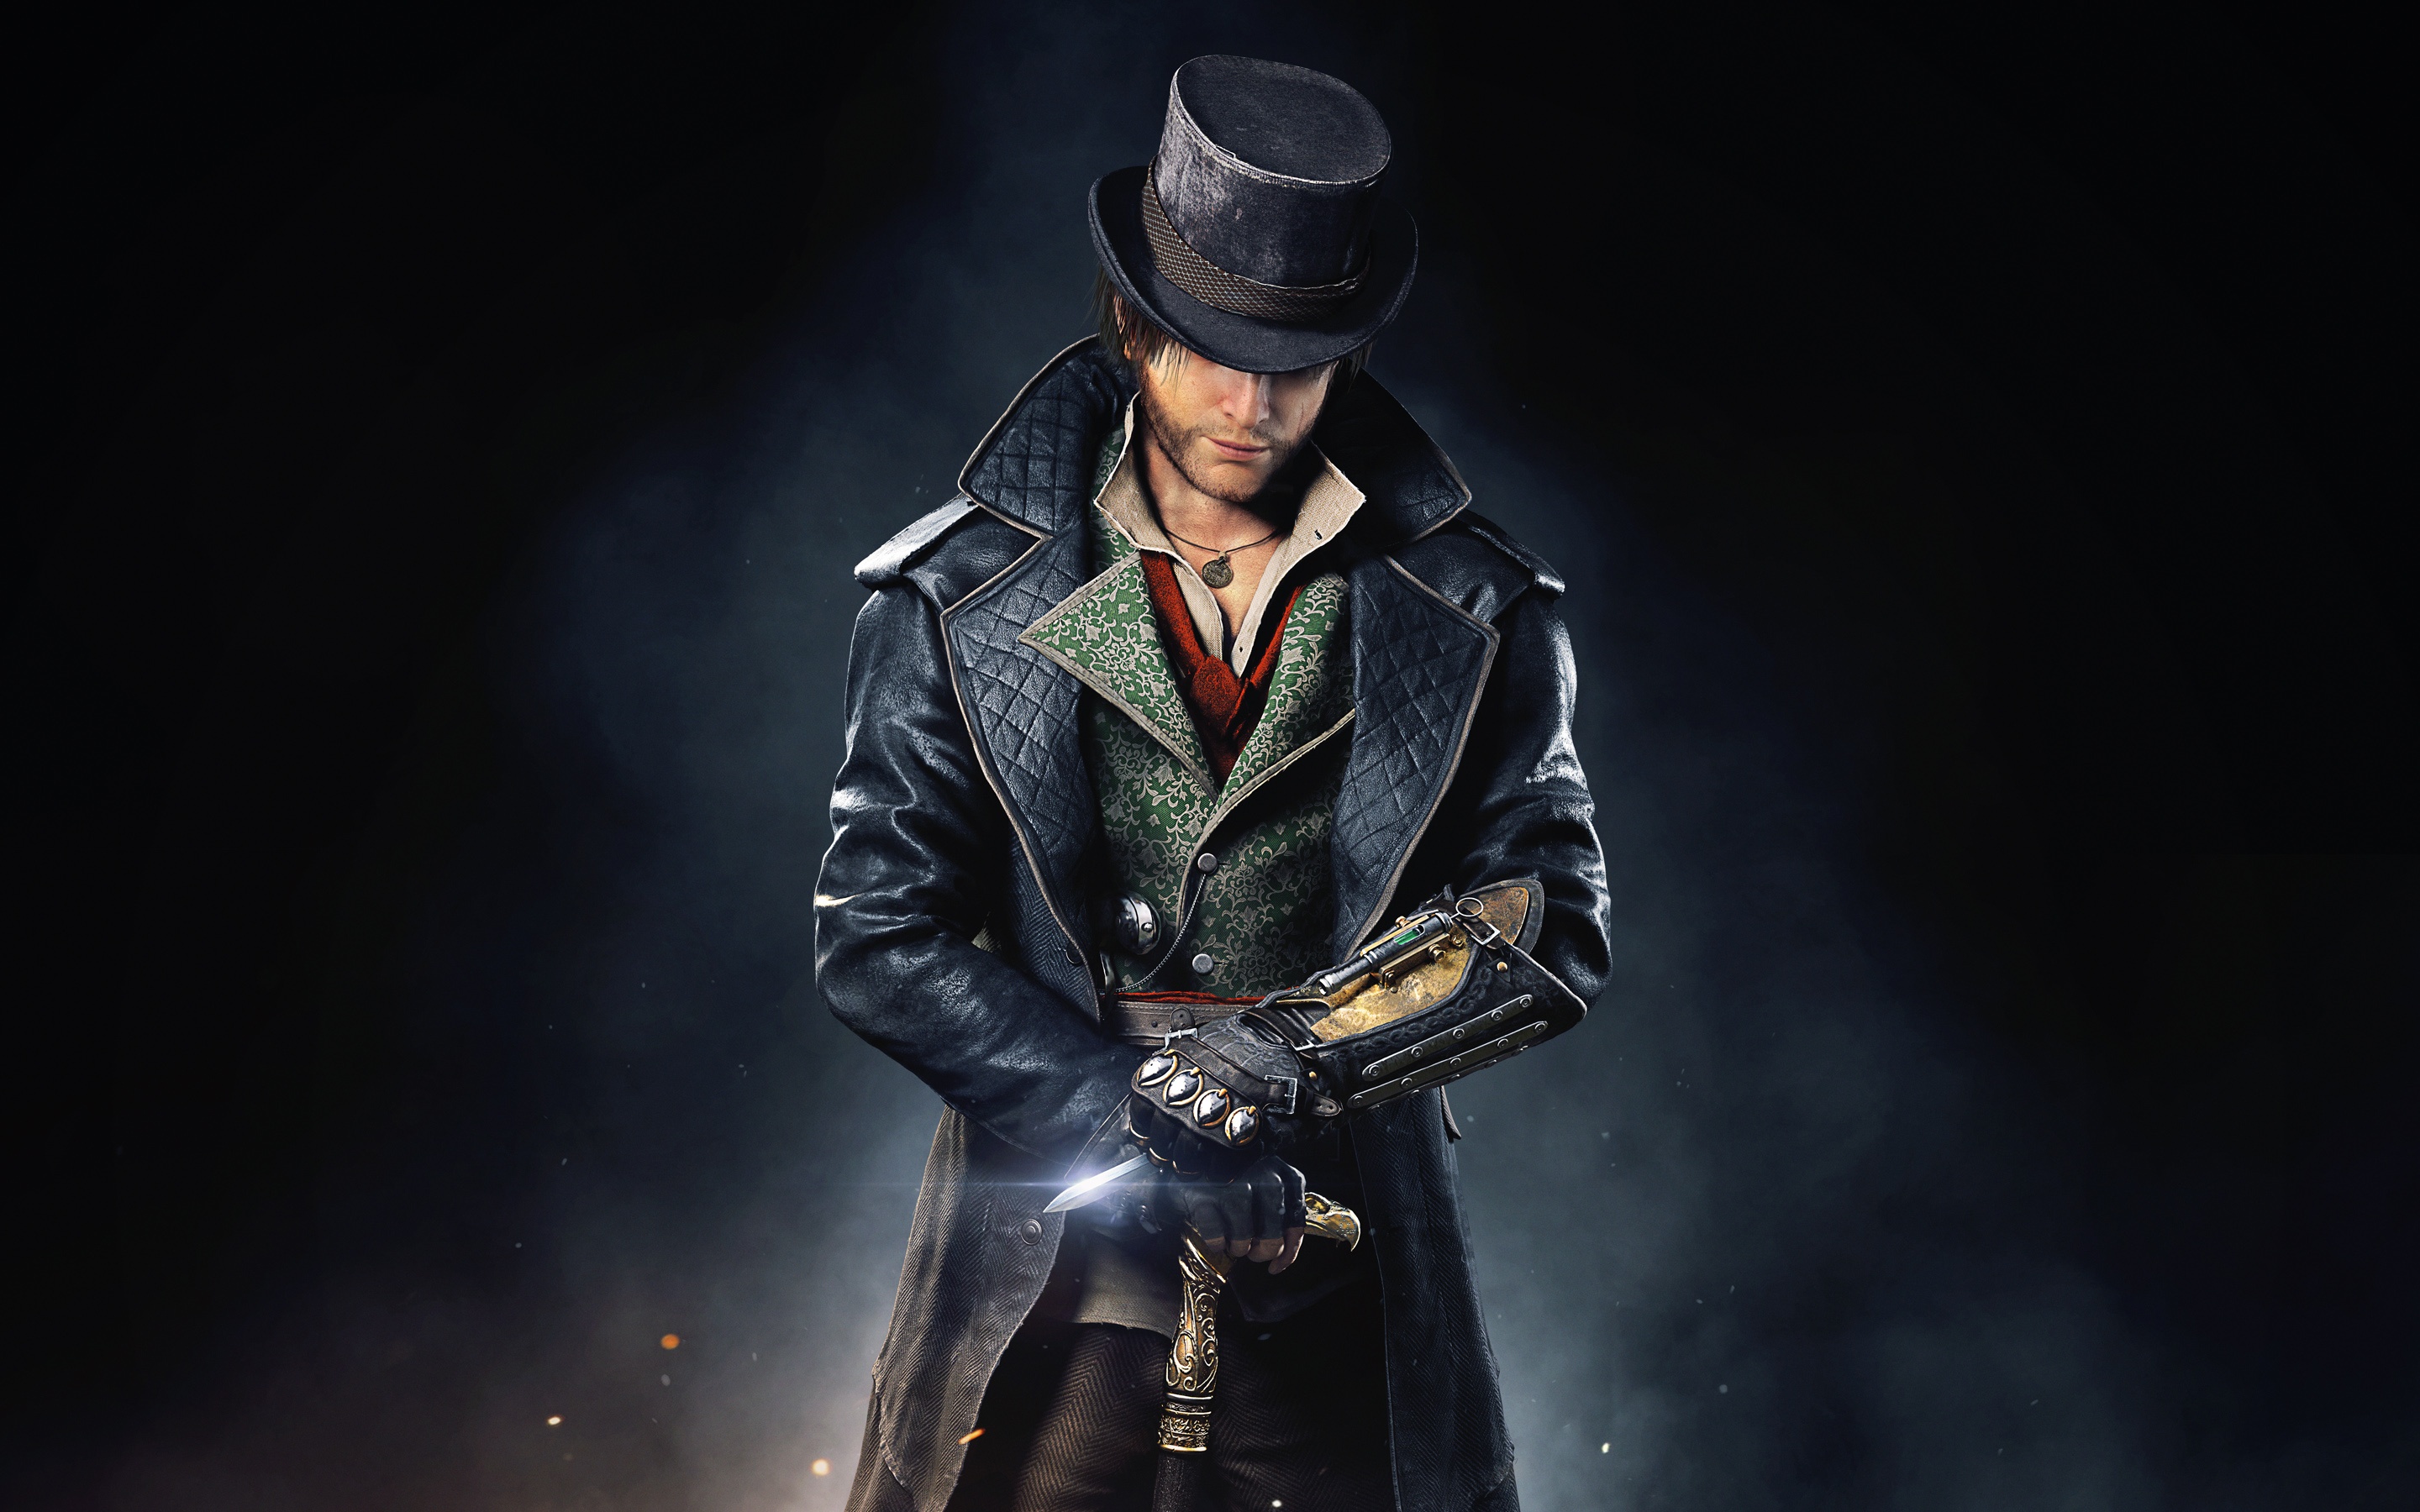 Jacob Frye Assassin's Creed Syndicate Wallpaper in jpg format for free download